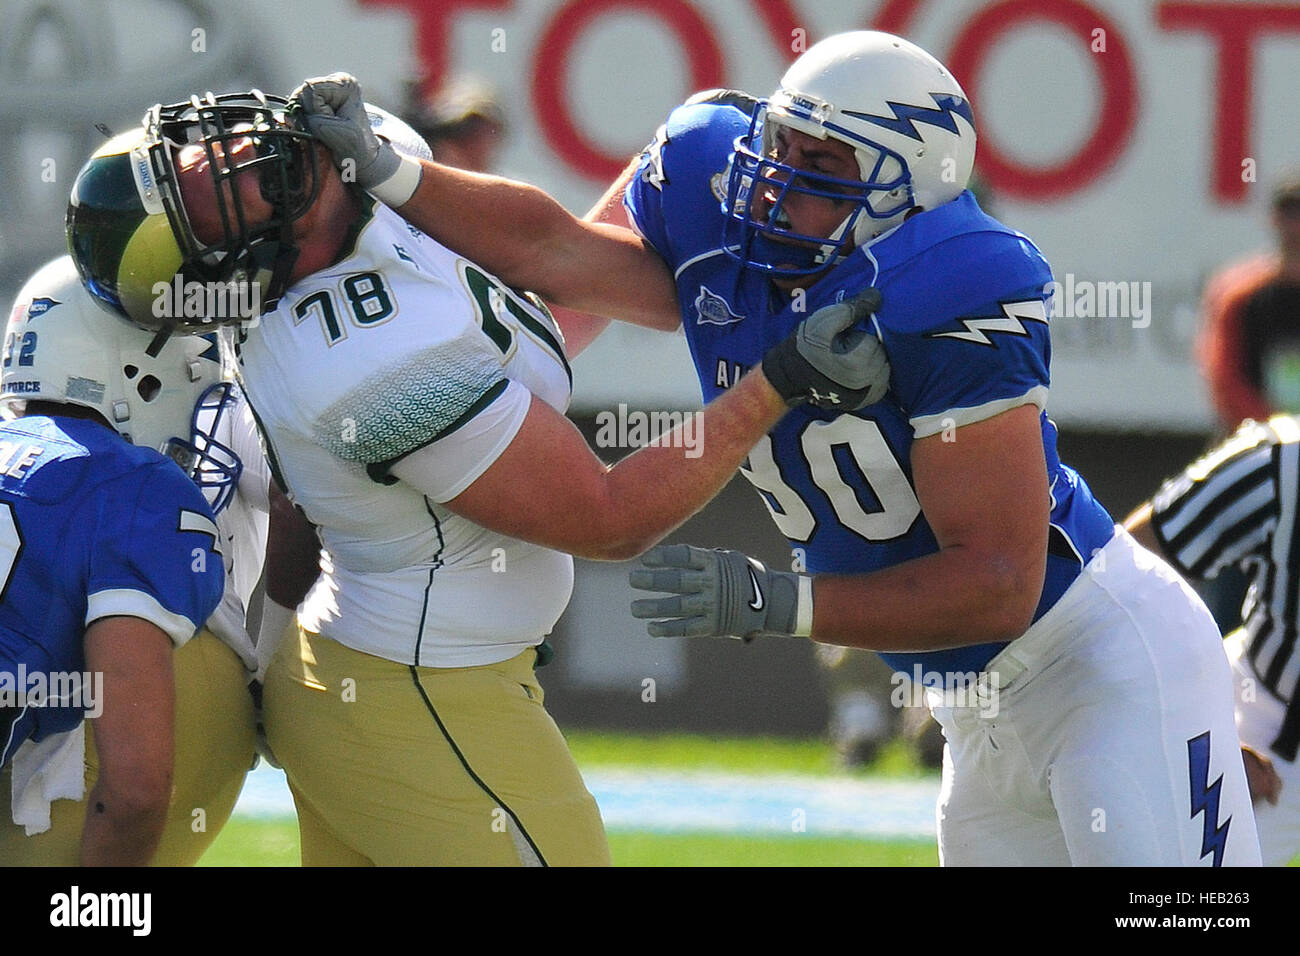 Air Force defensive lineman Rick Ricketts battles Colorado State offensive lineman Weston Richburg during the teams' Mountain West Conference contest at Falcon Stadium Oct 9, 2010. Ricketts is a senior and native of San Jose, Calif. (Air Force photo/Bill Evans) Stock Photo